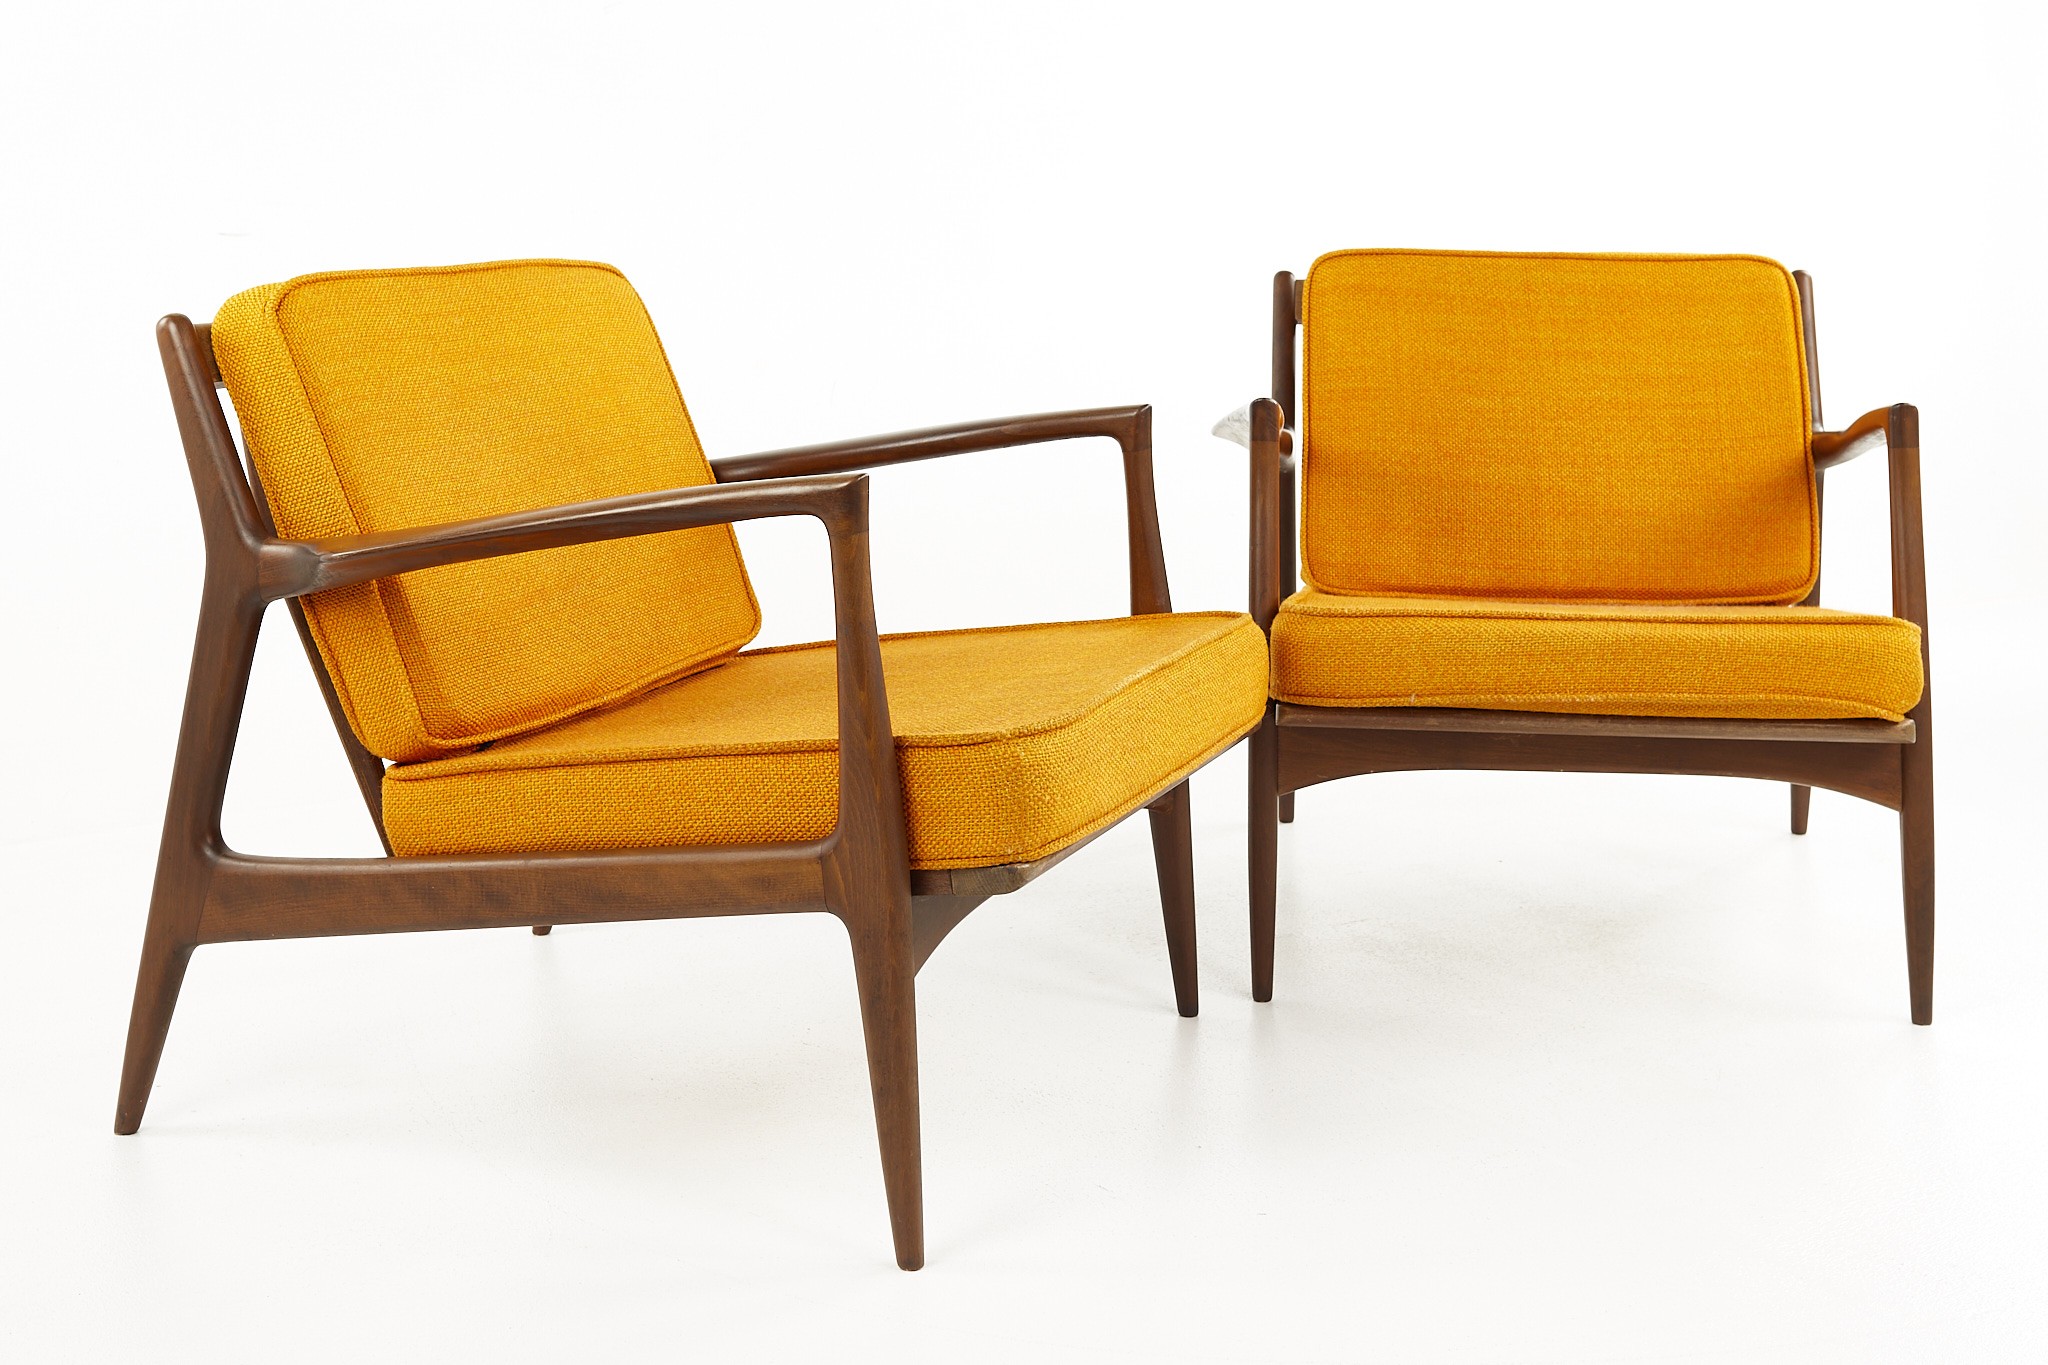 Kofod Larsen for Selig Mid Century Walnut Lounge Chairs - a Pair